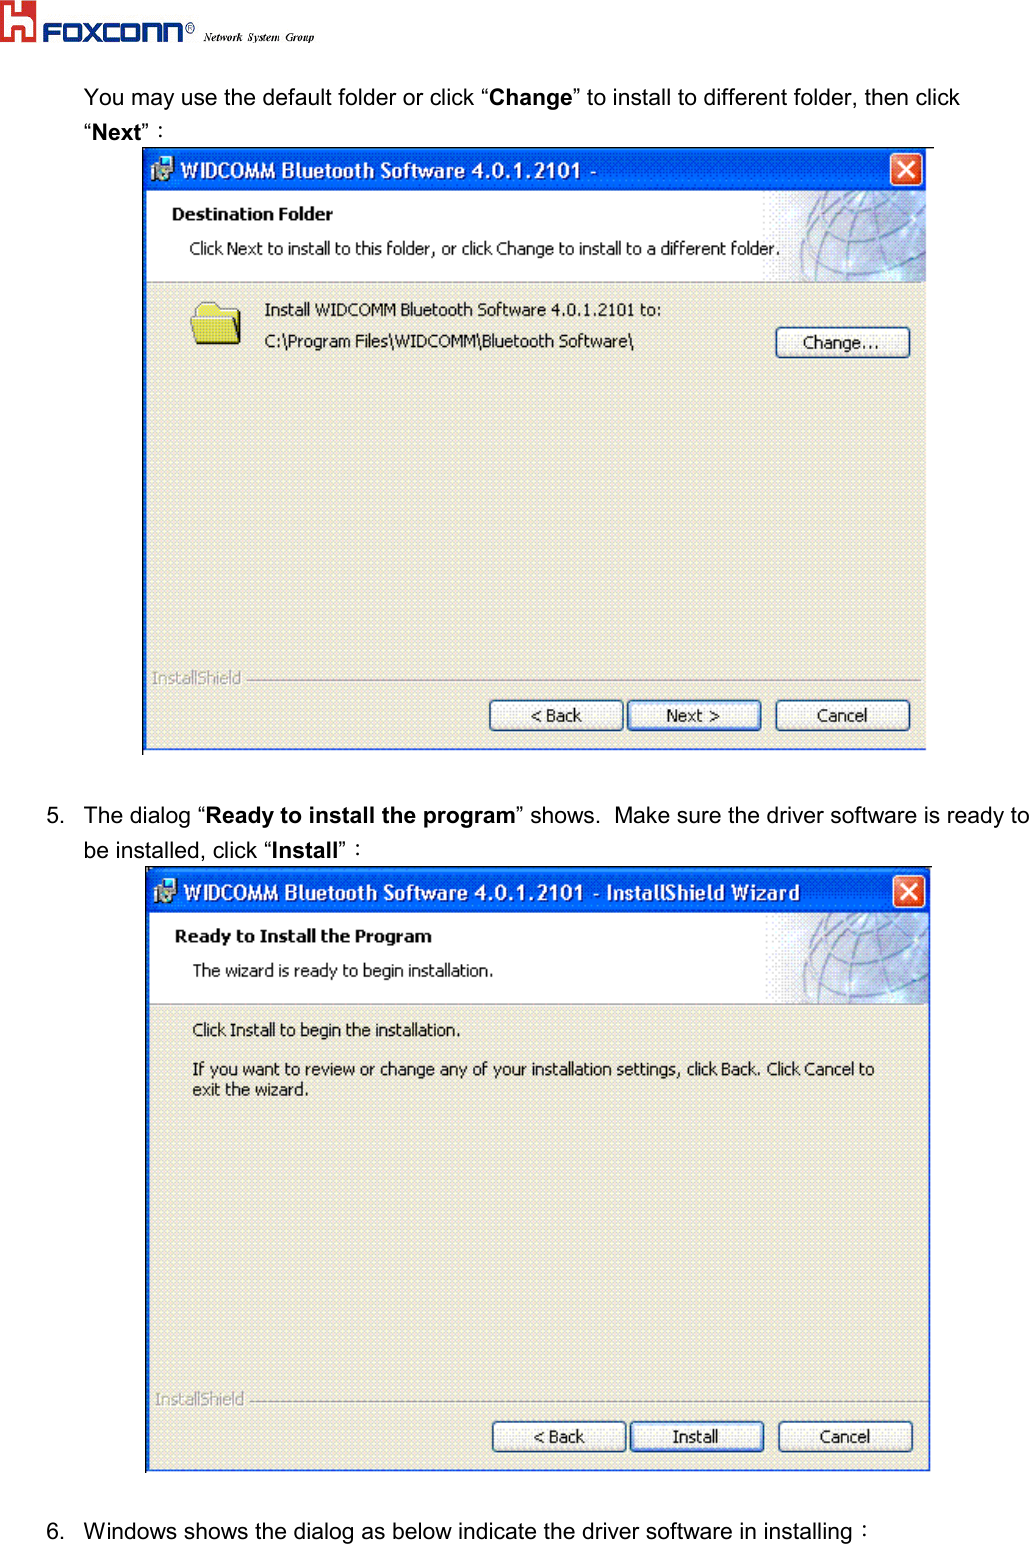 You may use the default folder or click “Change” to install to different folder, then click“Next”：5.  The dialog “Ready to install the program” shows.  Make sure the driver software is ready tobe installed, click “Install”：6.  Windows shows the dialog as below indicate the driver software in installing：